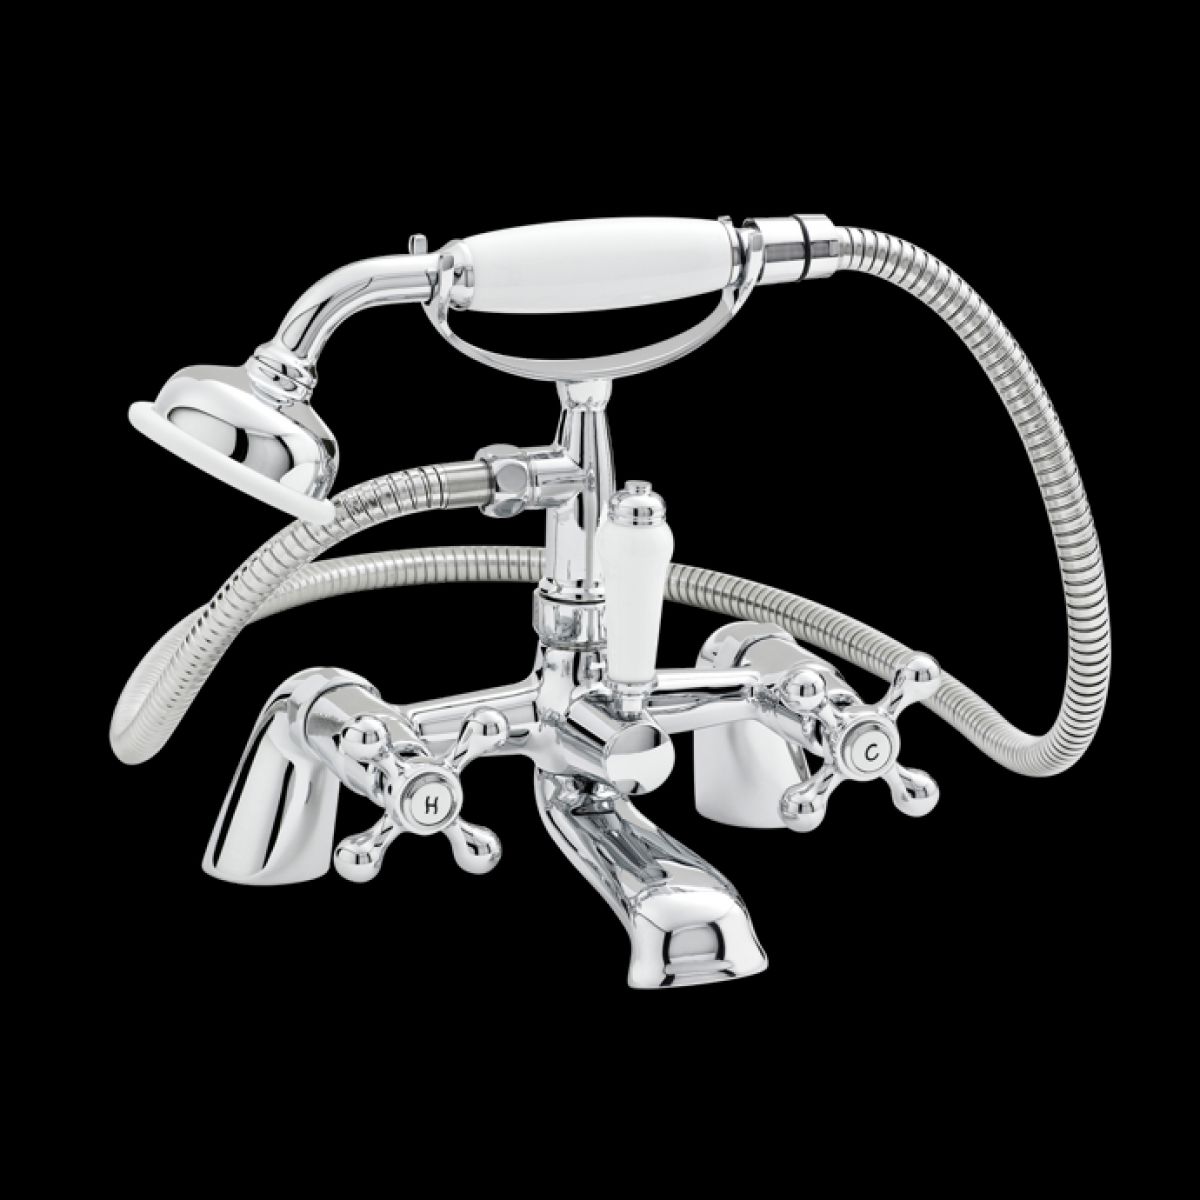 UK Bathrooms Essentials Viscount Deck Mounted Bath/Shower Mixer with Large Handset - Chrome/White